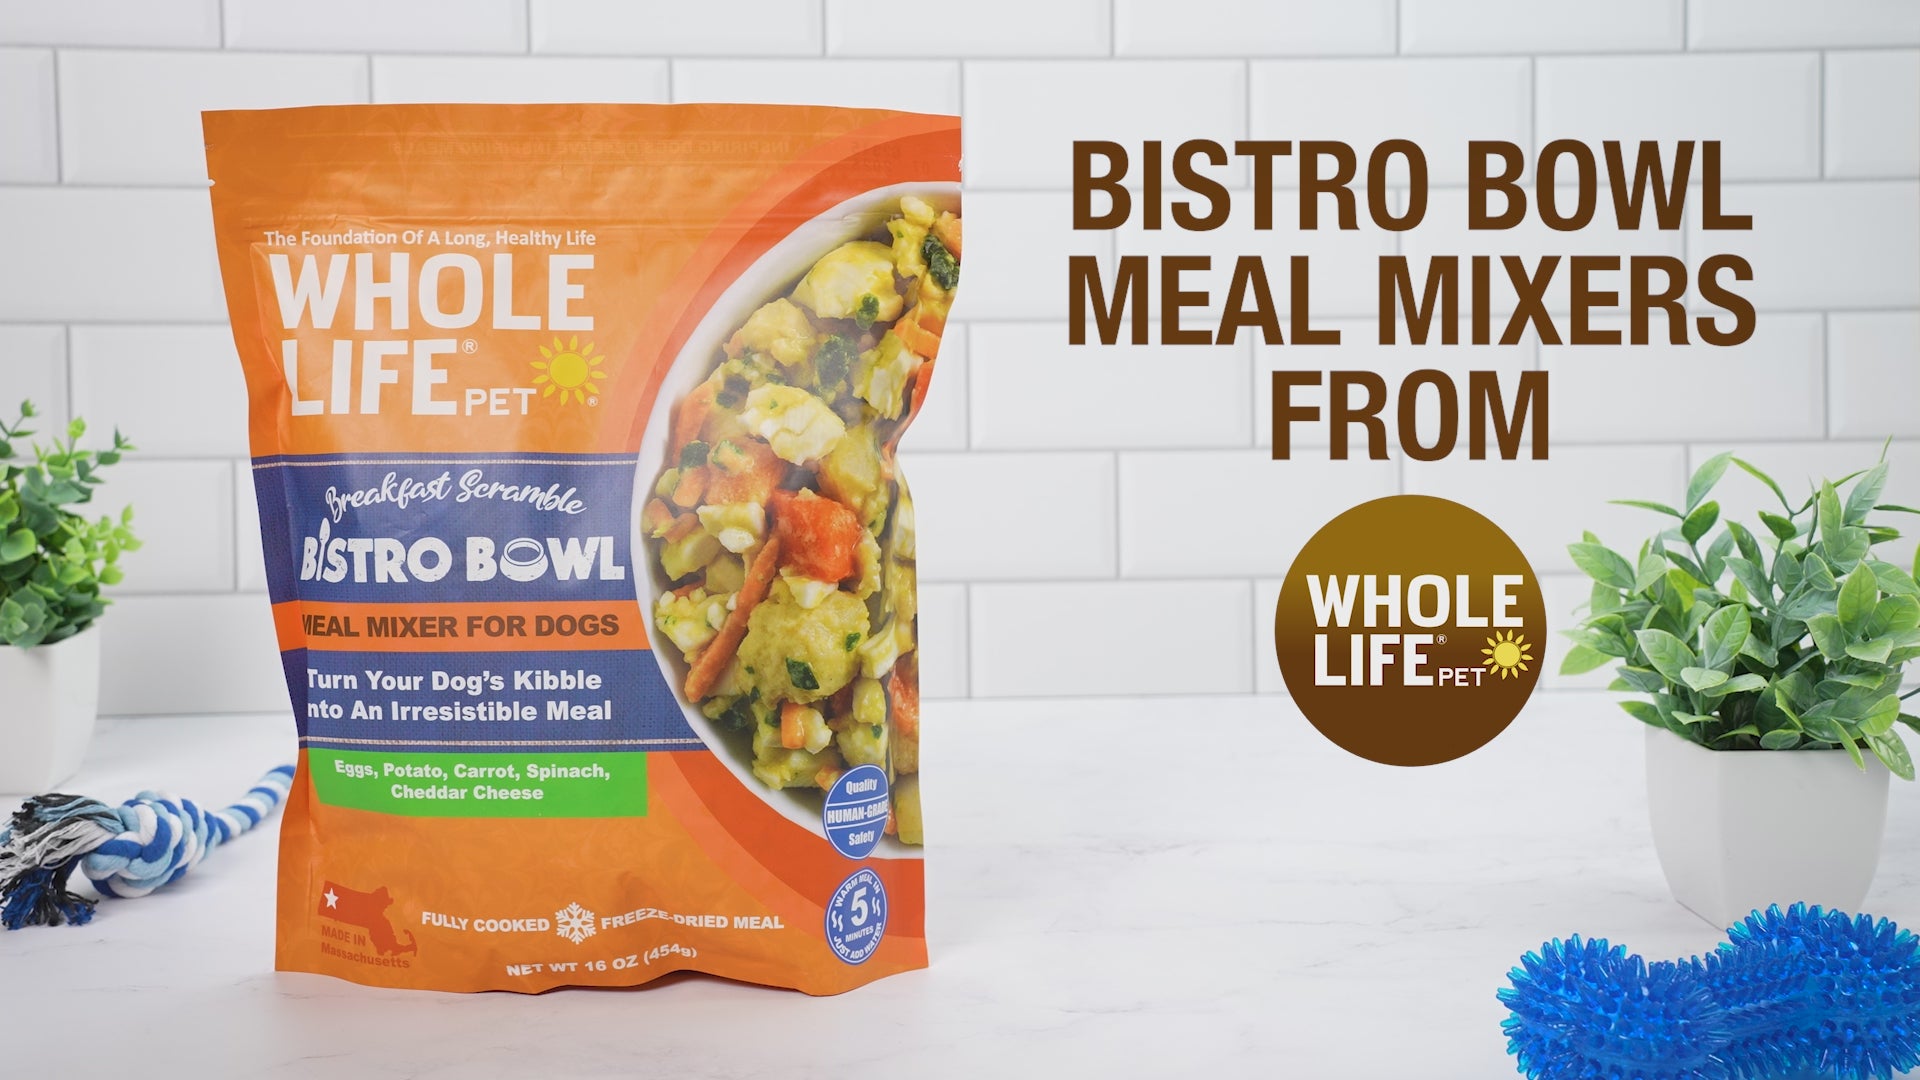 Bistro Bowls – Classic Pasta Meal Mixers For Dogs